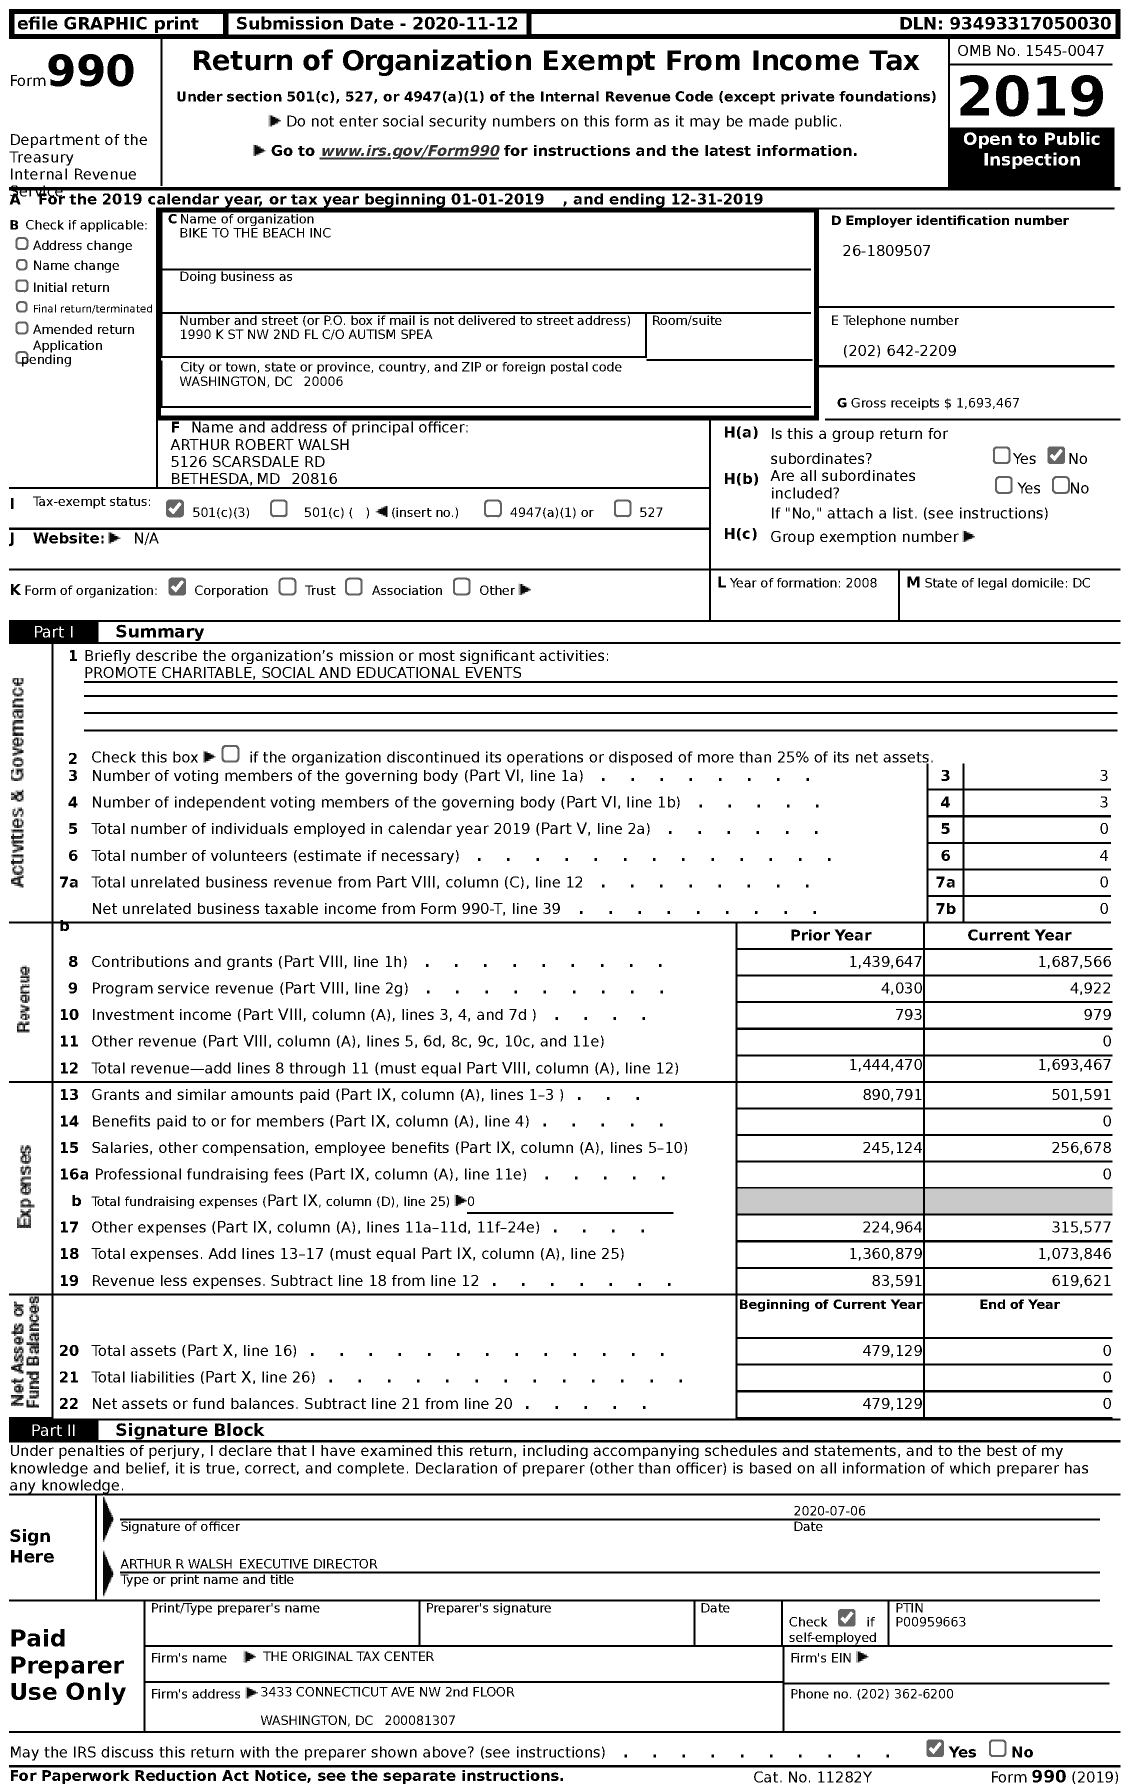 Image of first page of 2019 Form 990 for the Add Impact Network